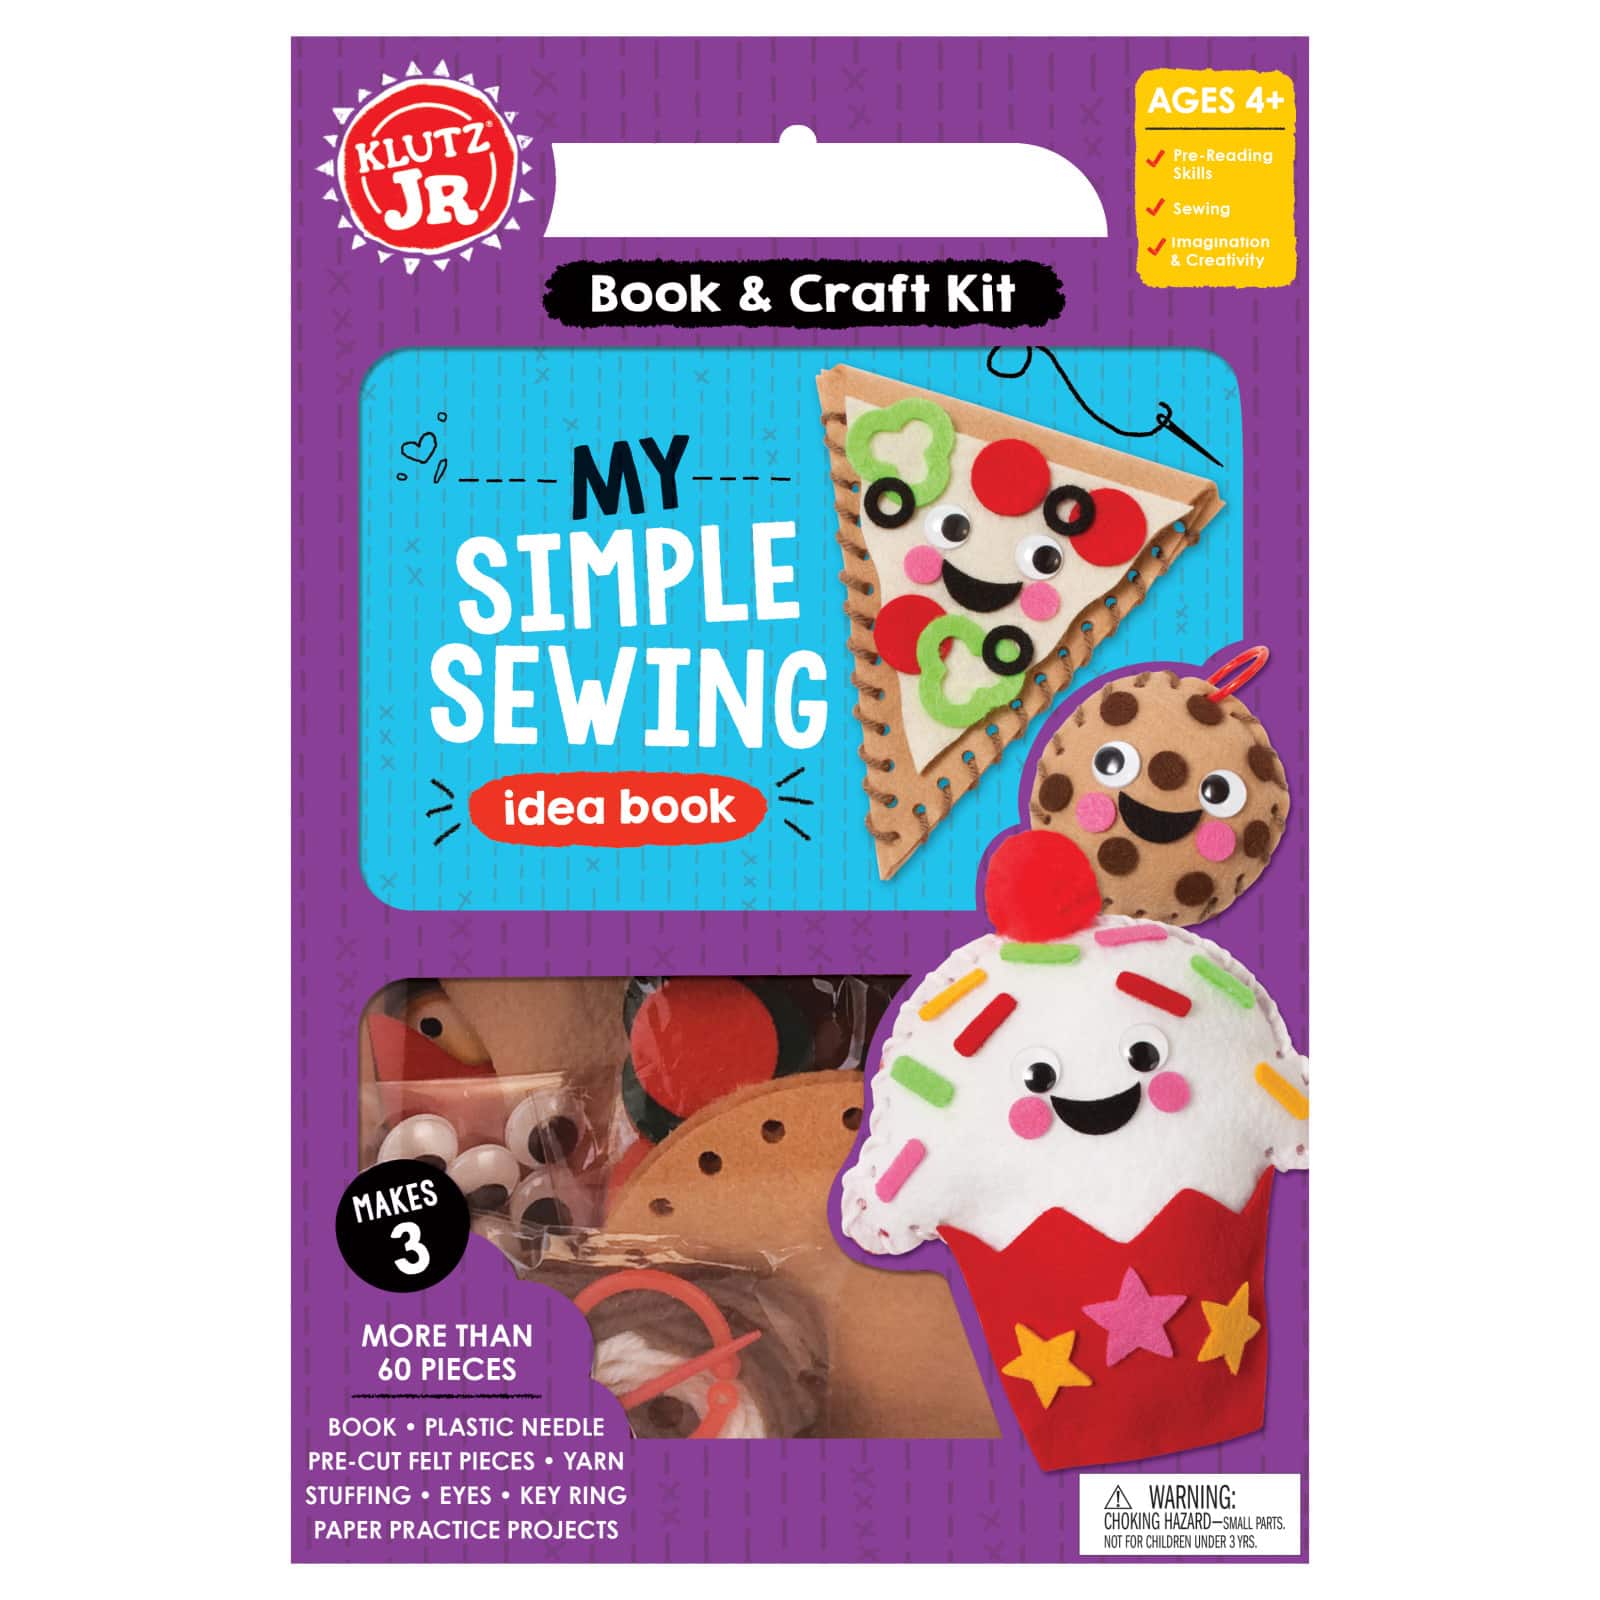 Sewing Kit For Kids Ages 8-12, Make Your Own Felt Mini Treats